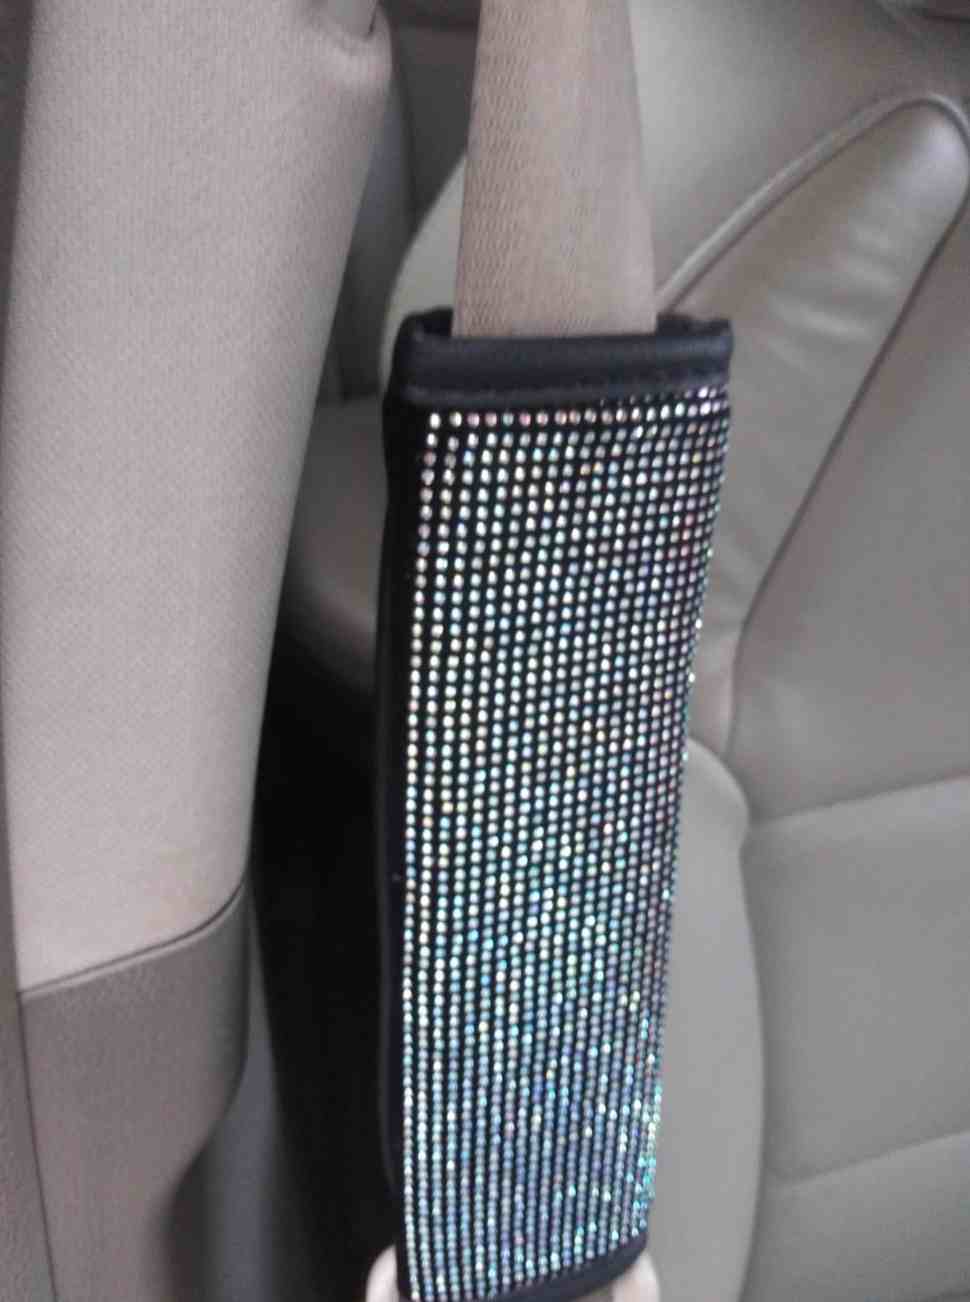 Multicolor Bling Seat Belt Strap Covers